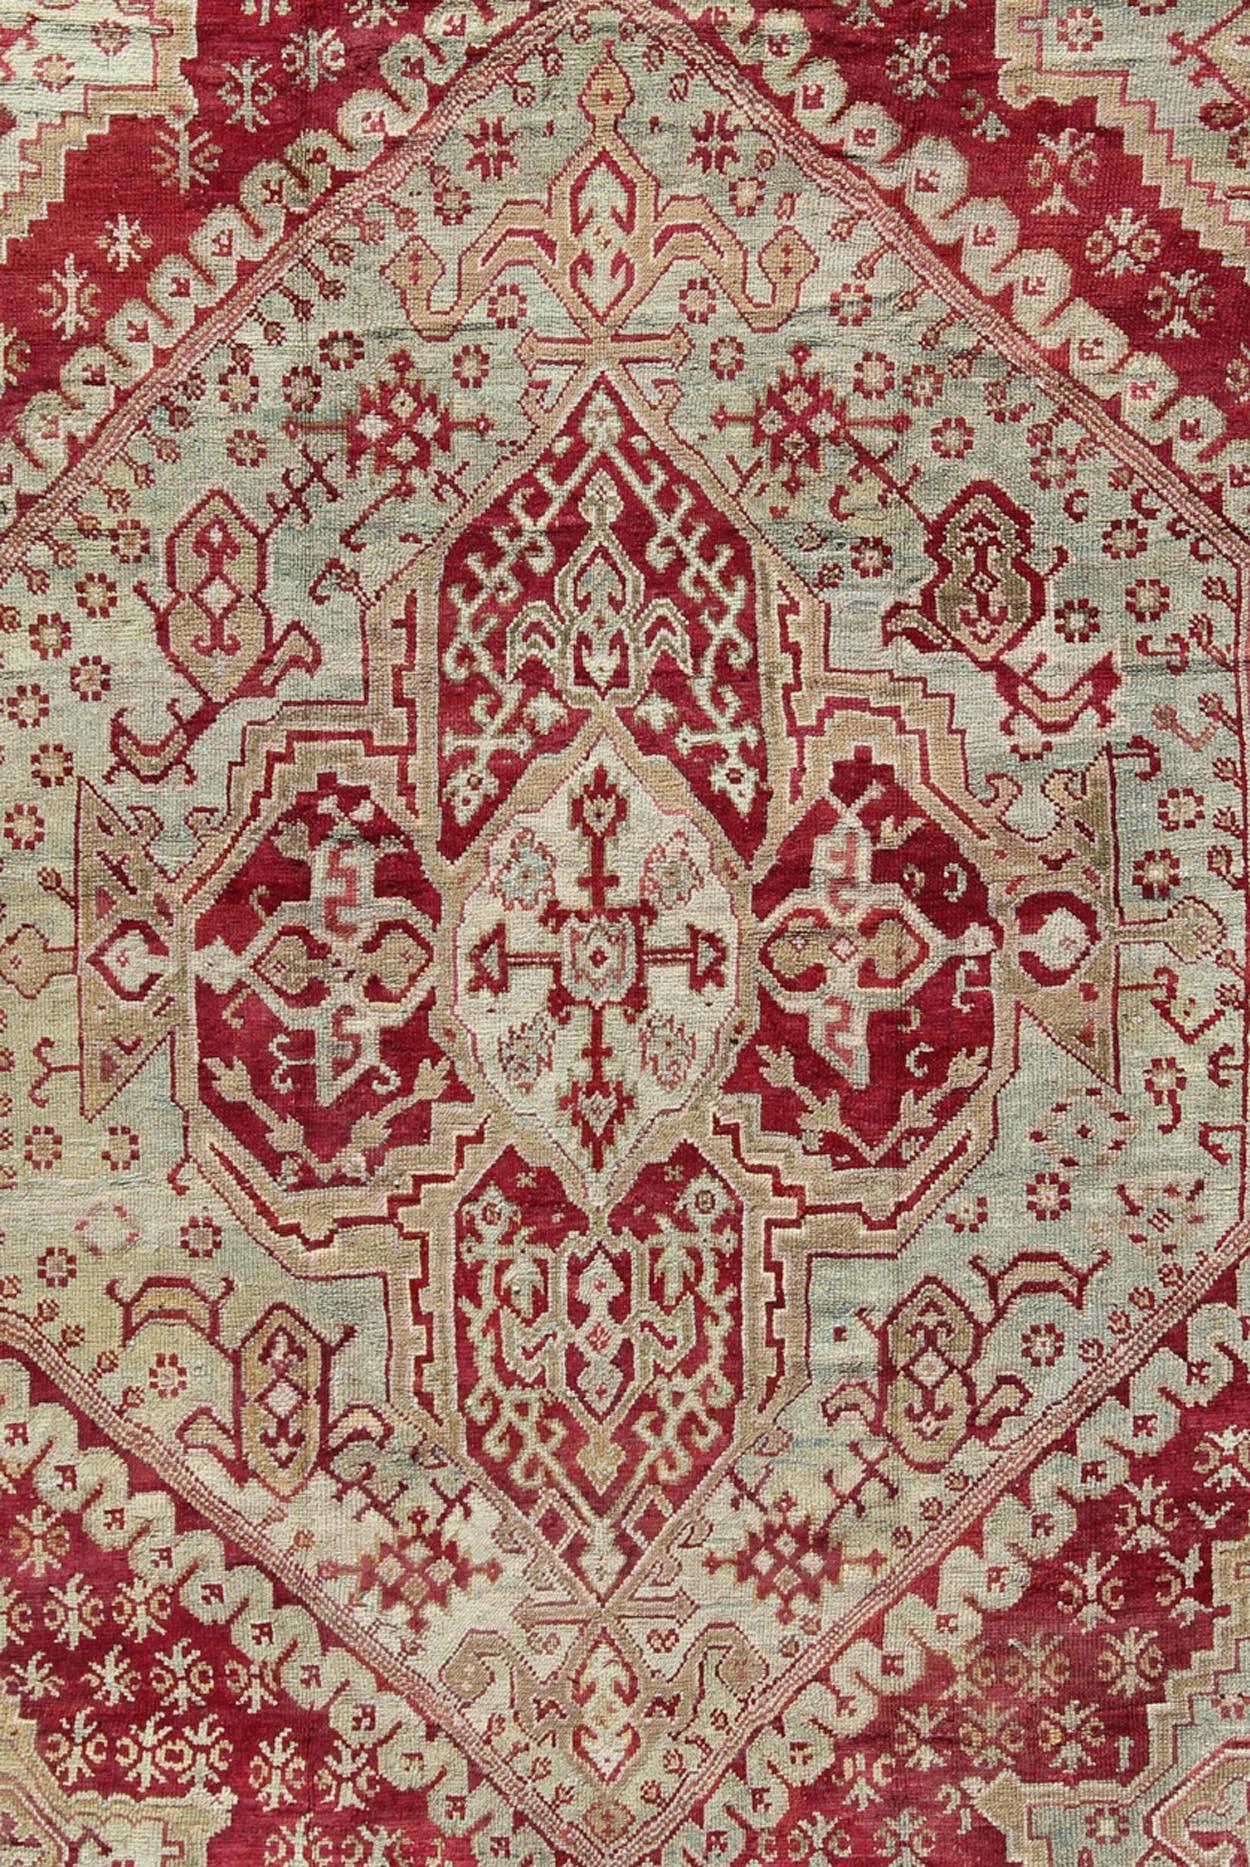 Oushak Antique Turkish Ghiordes 19th Century Rug in Raspberry Red, Ice Blue & L. Green For Sale